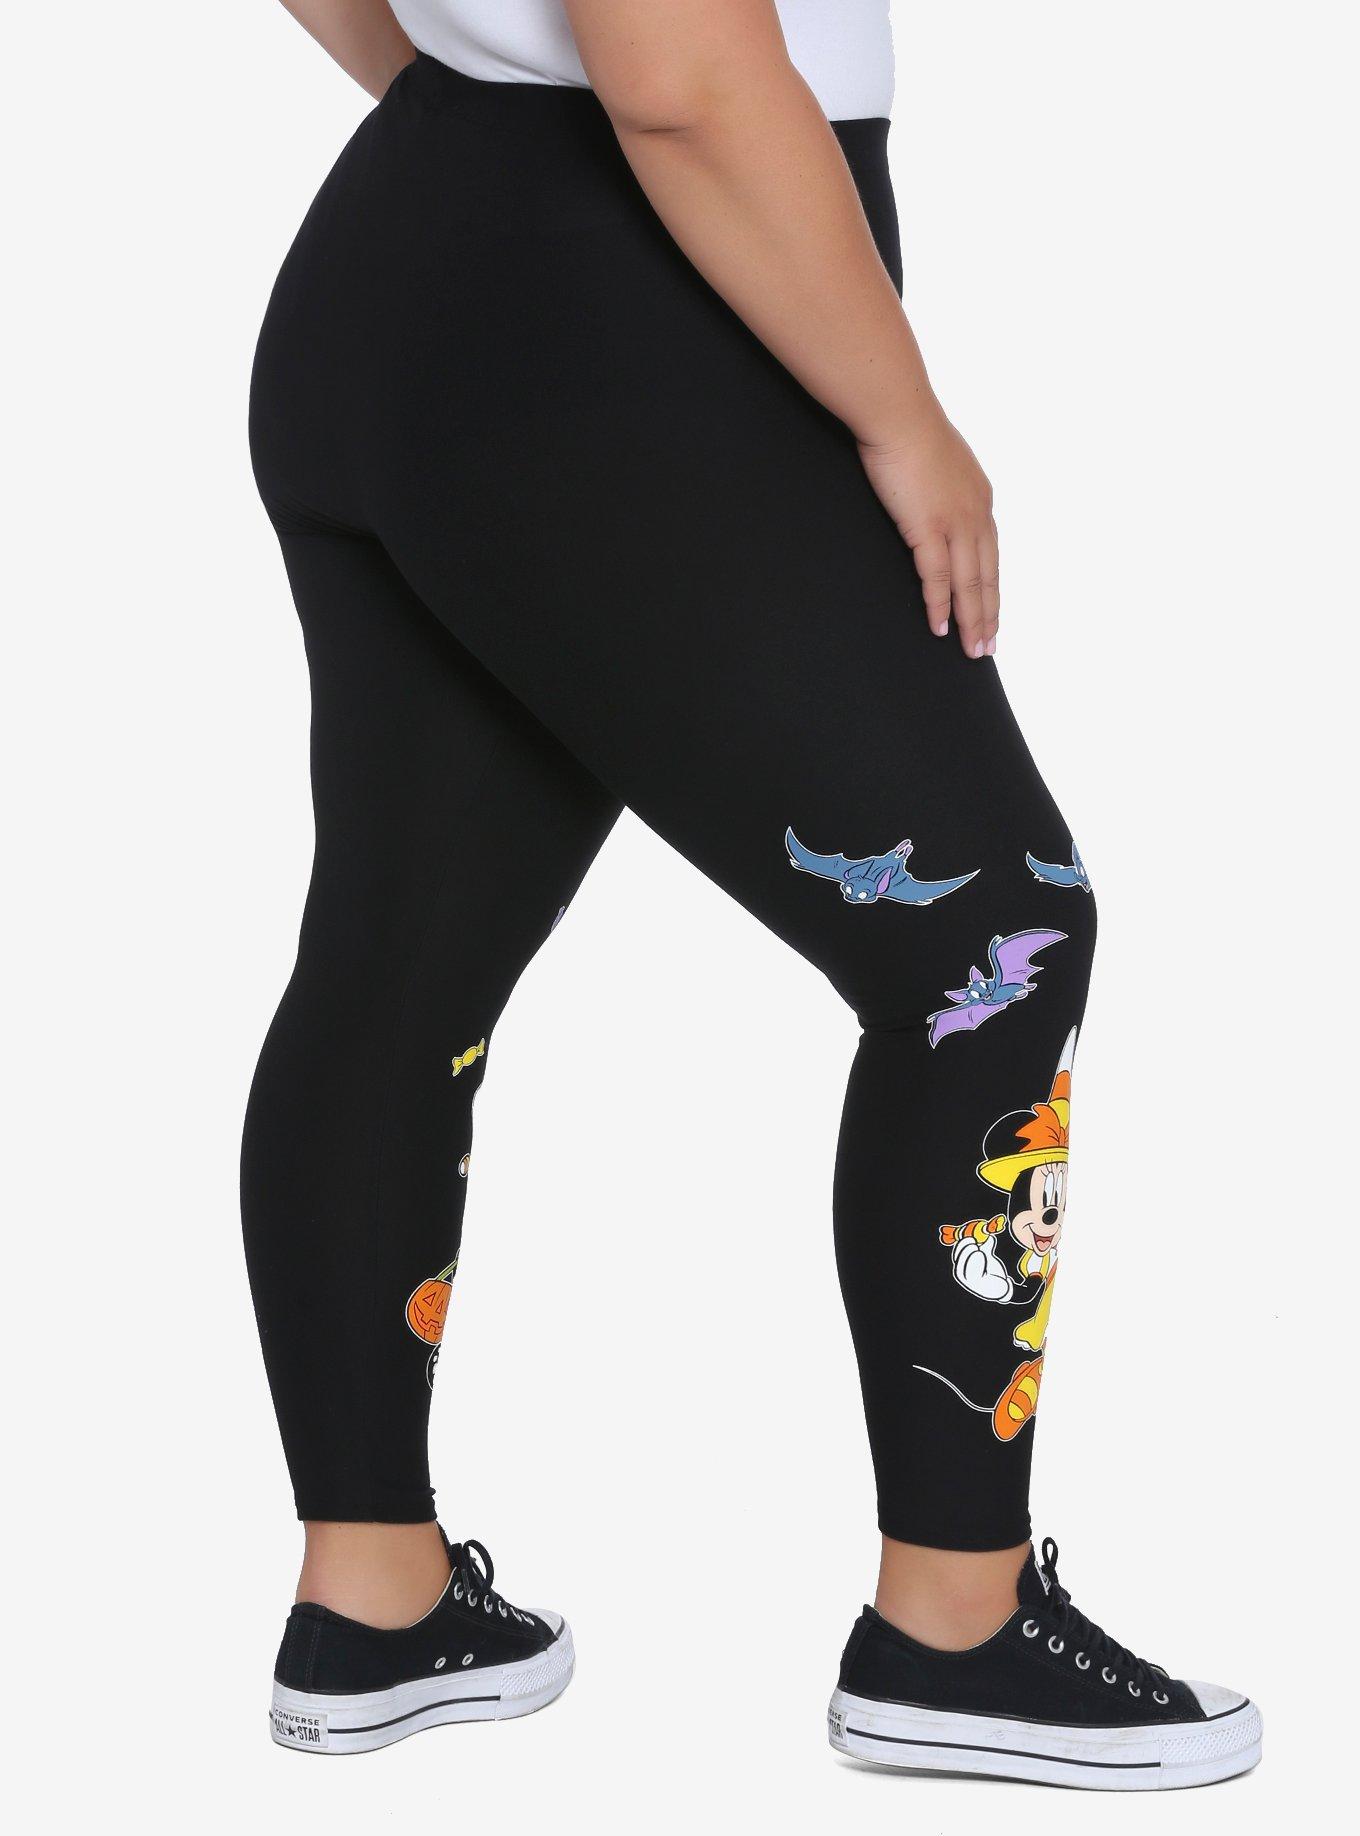 Strut Your Style With Fabulous Disney Leggings From Hot Topic